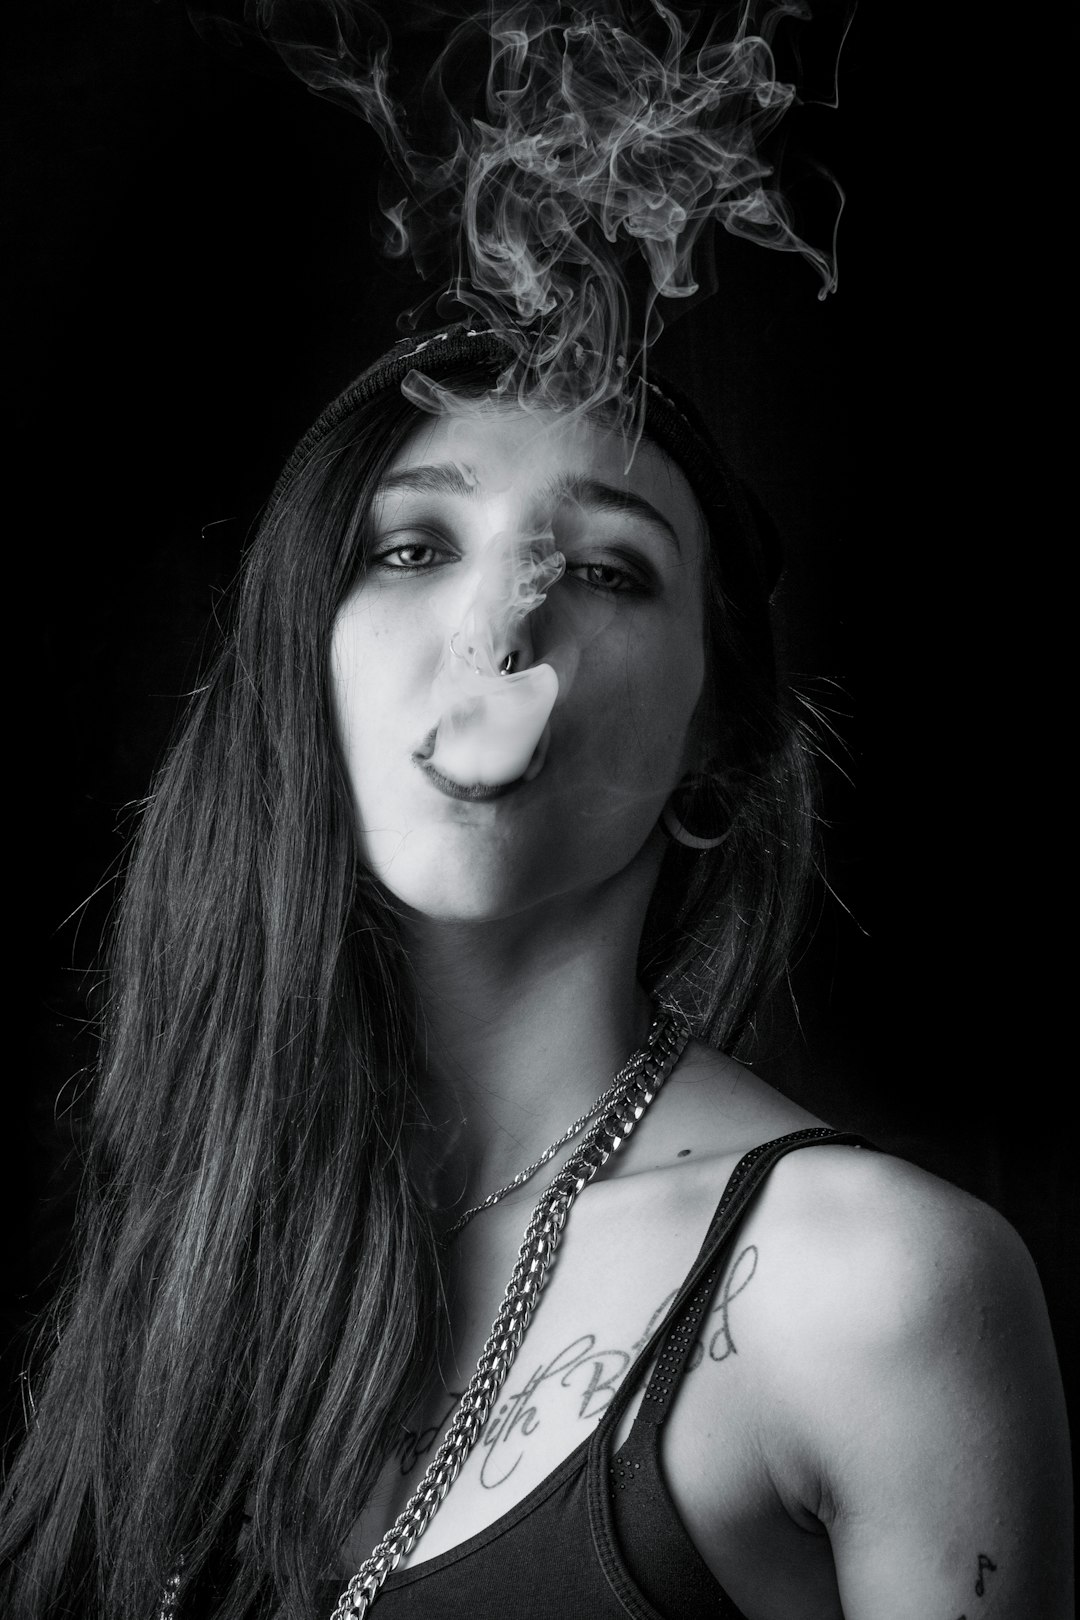 grayscale time-lapse photography of woman blowing smoke from her mouth